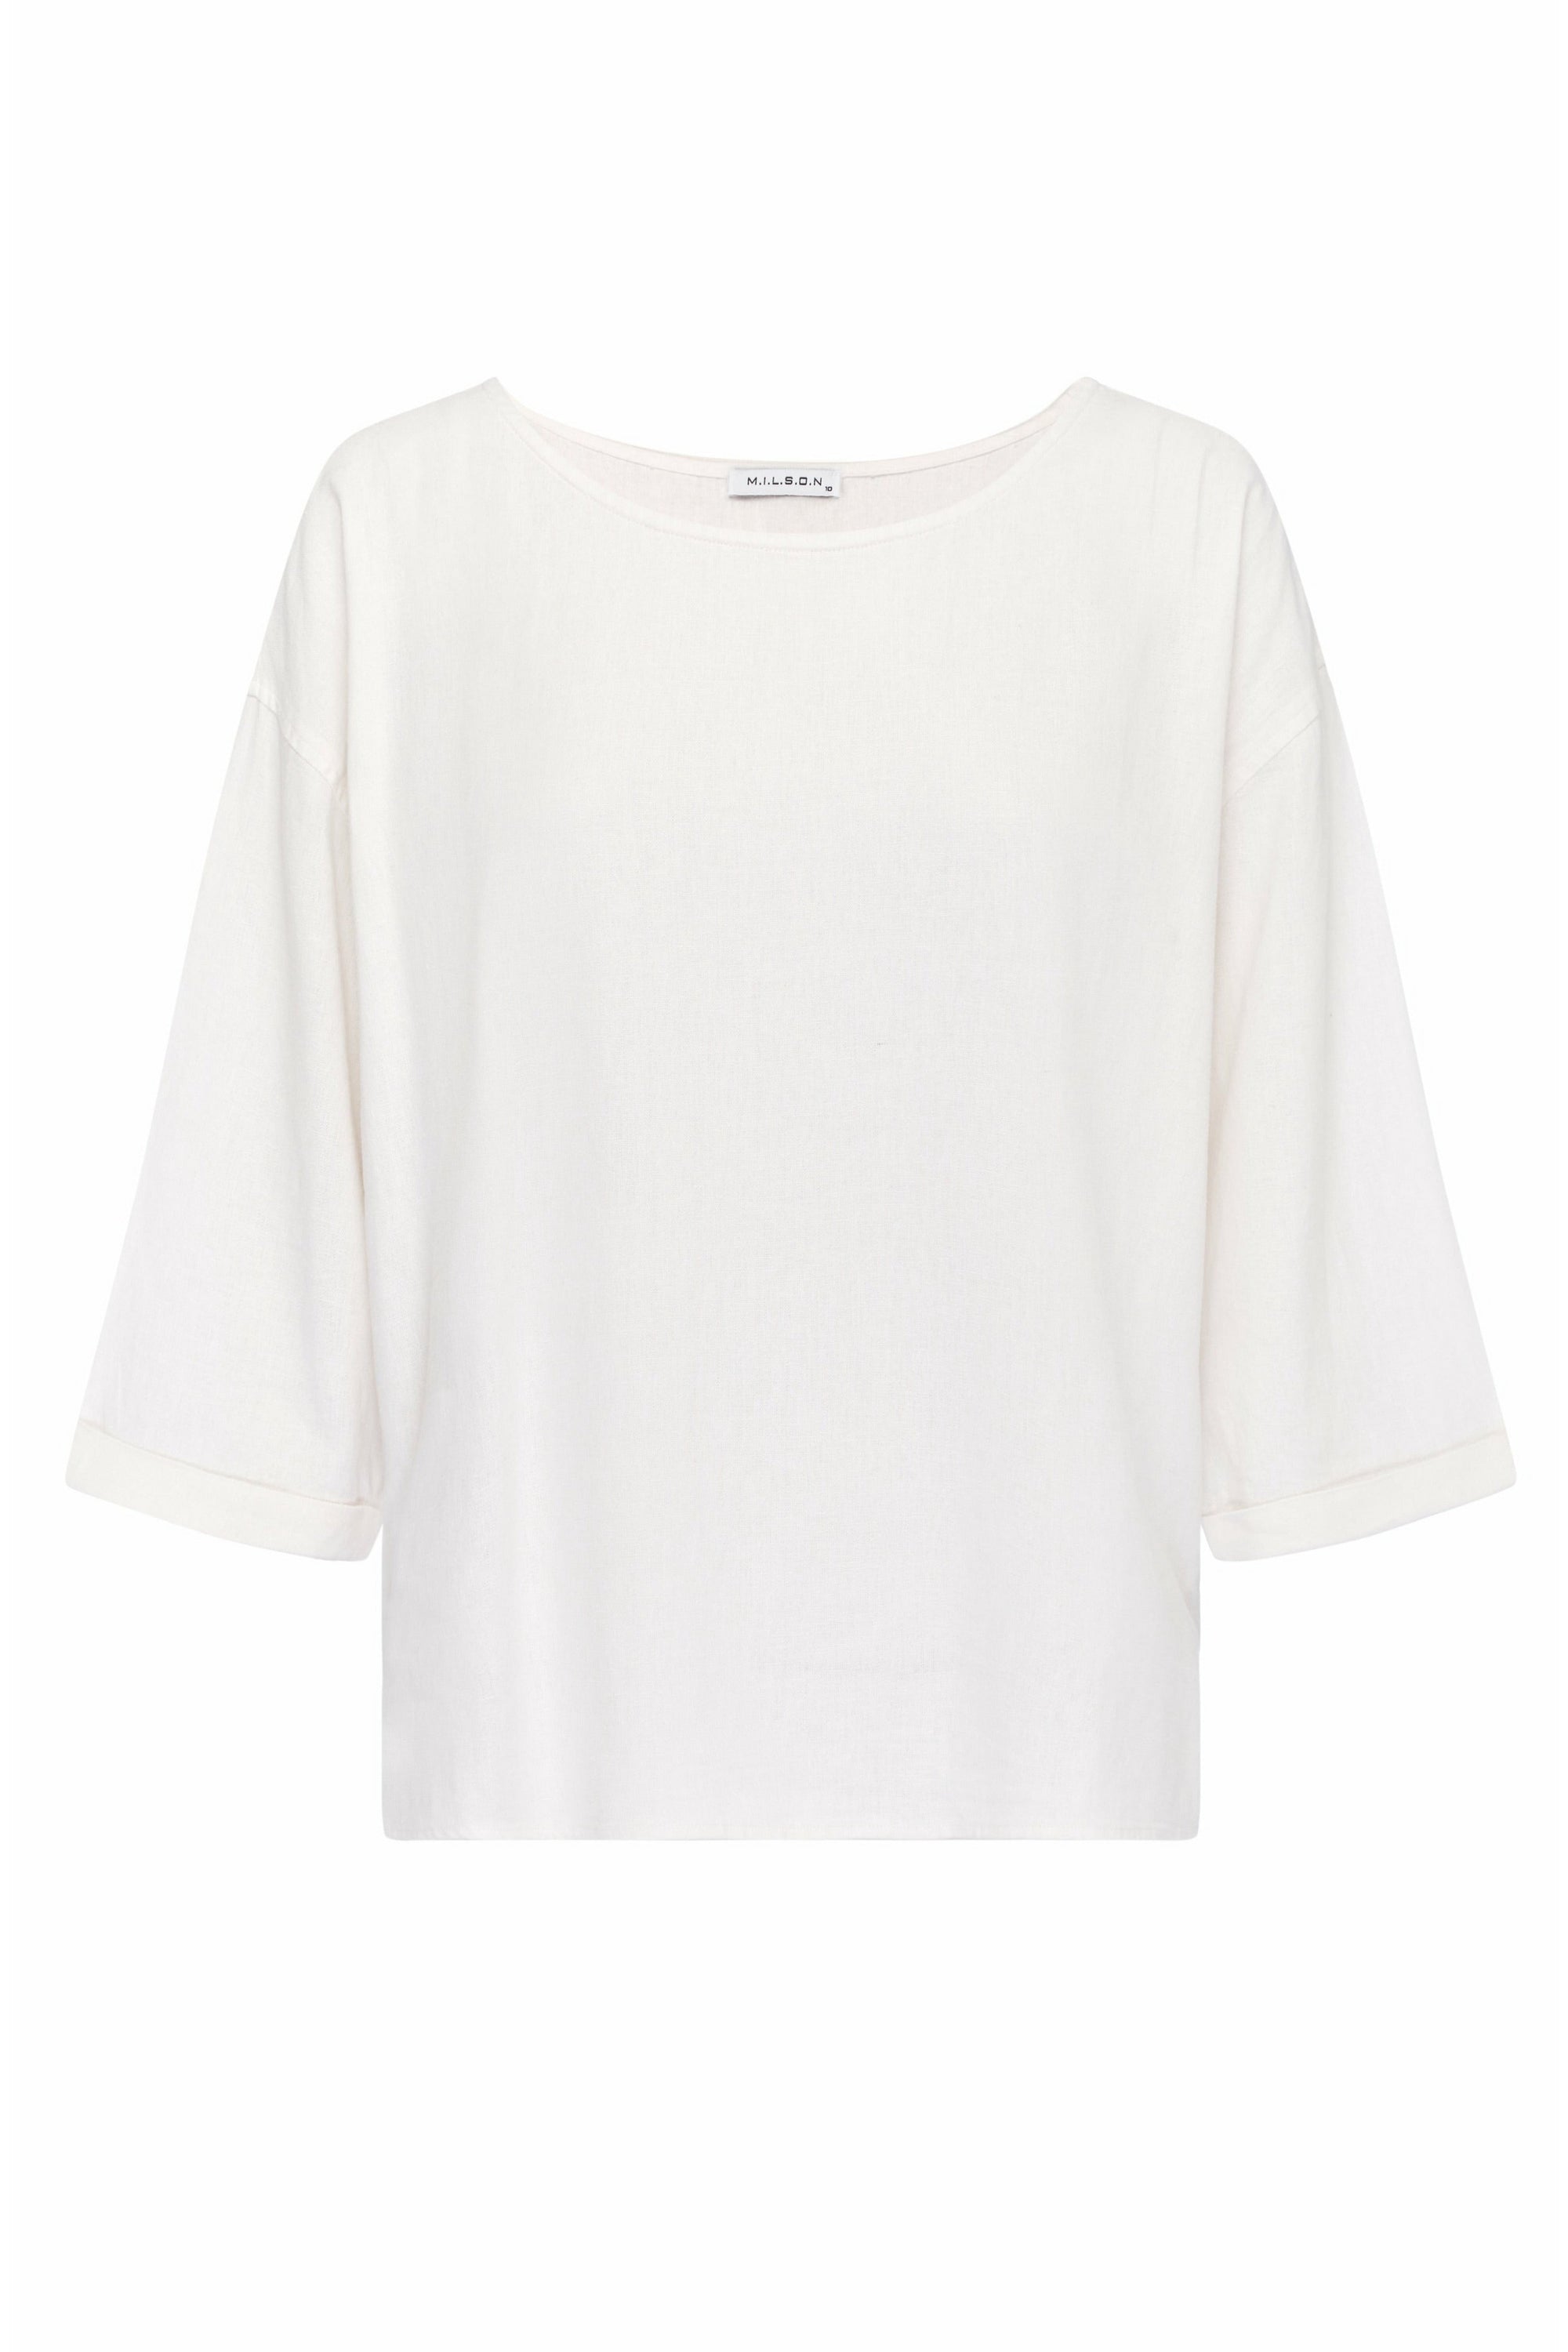 M.I.L.S.O.N Layla Linen Top in White